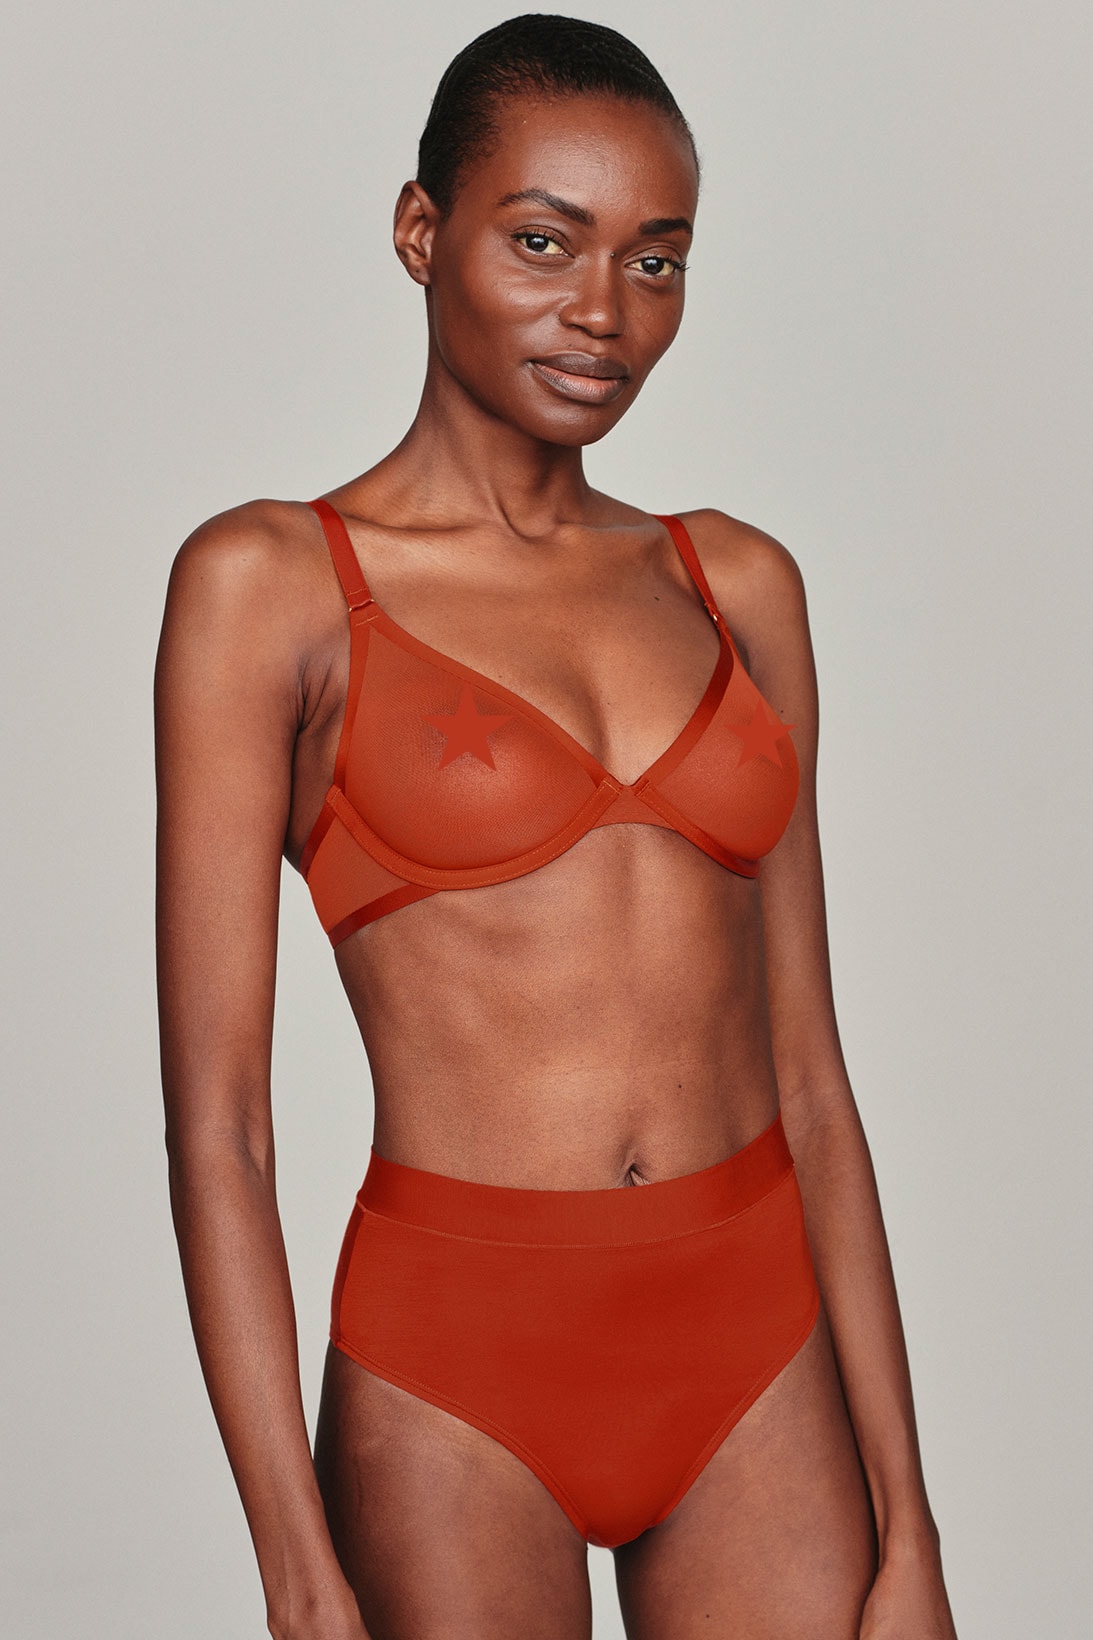 CUUP Launches New Mars & Slate Lingerie